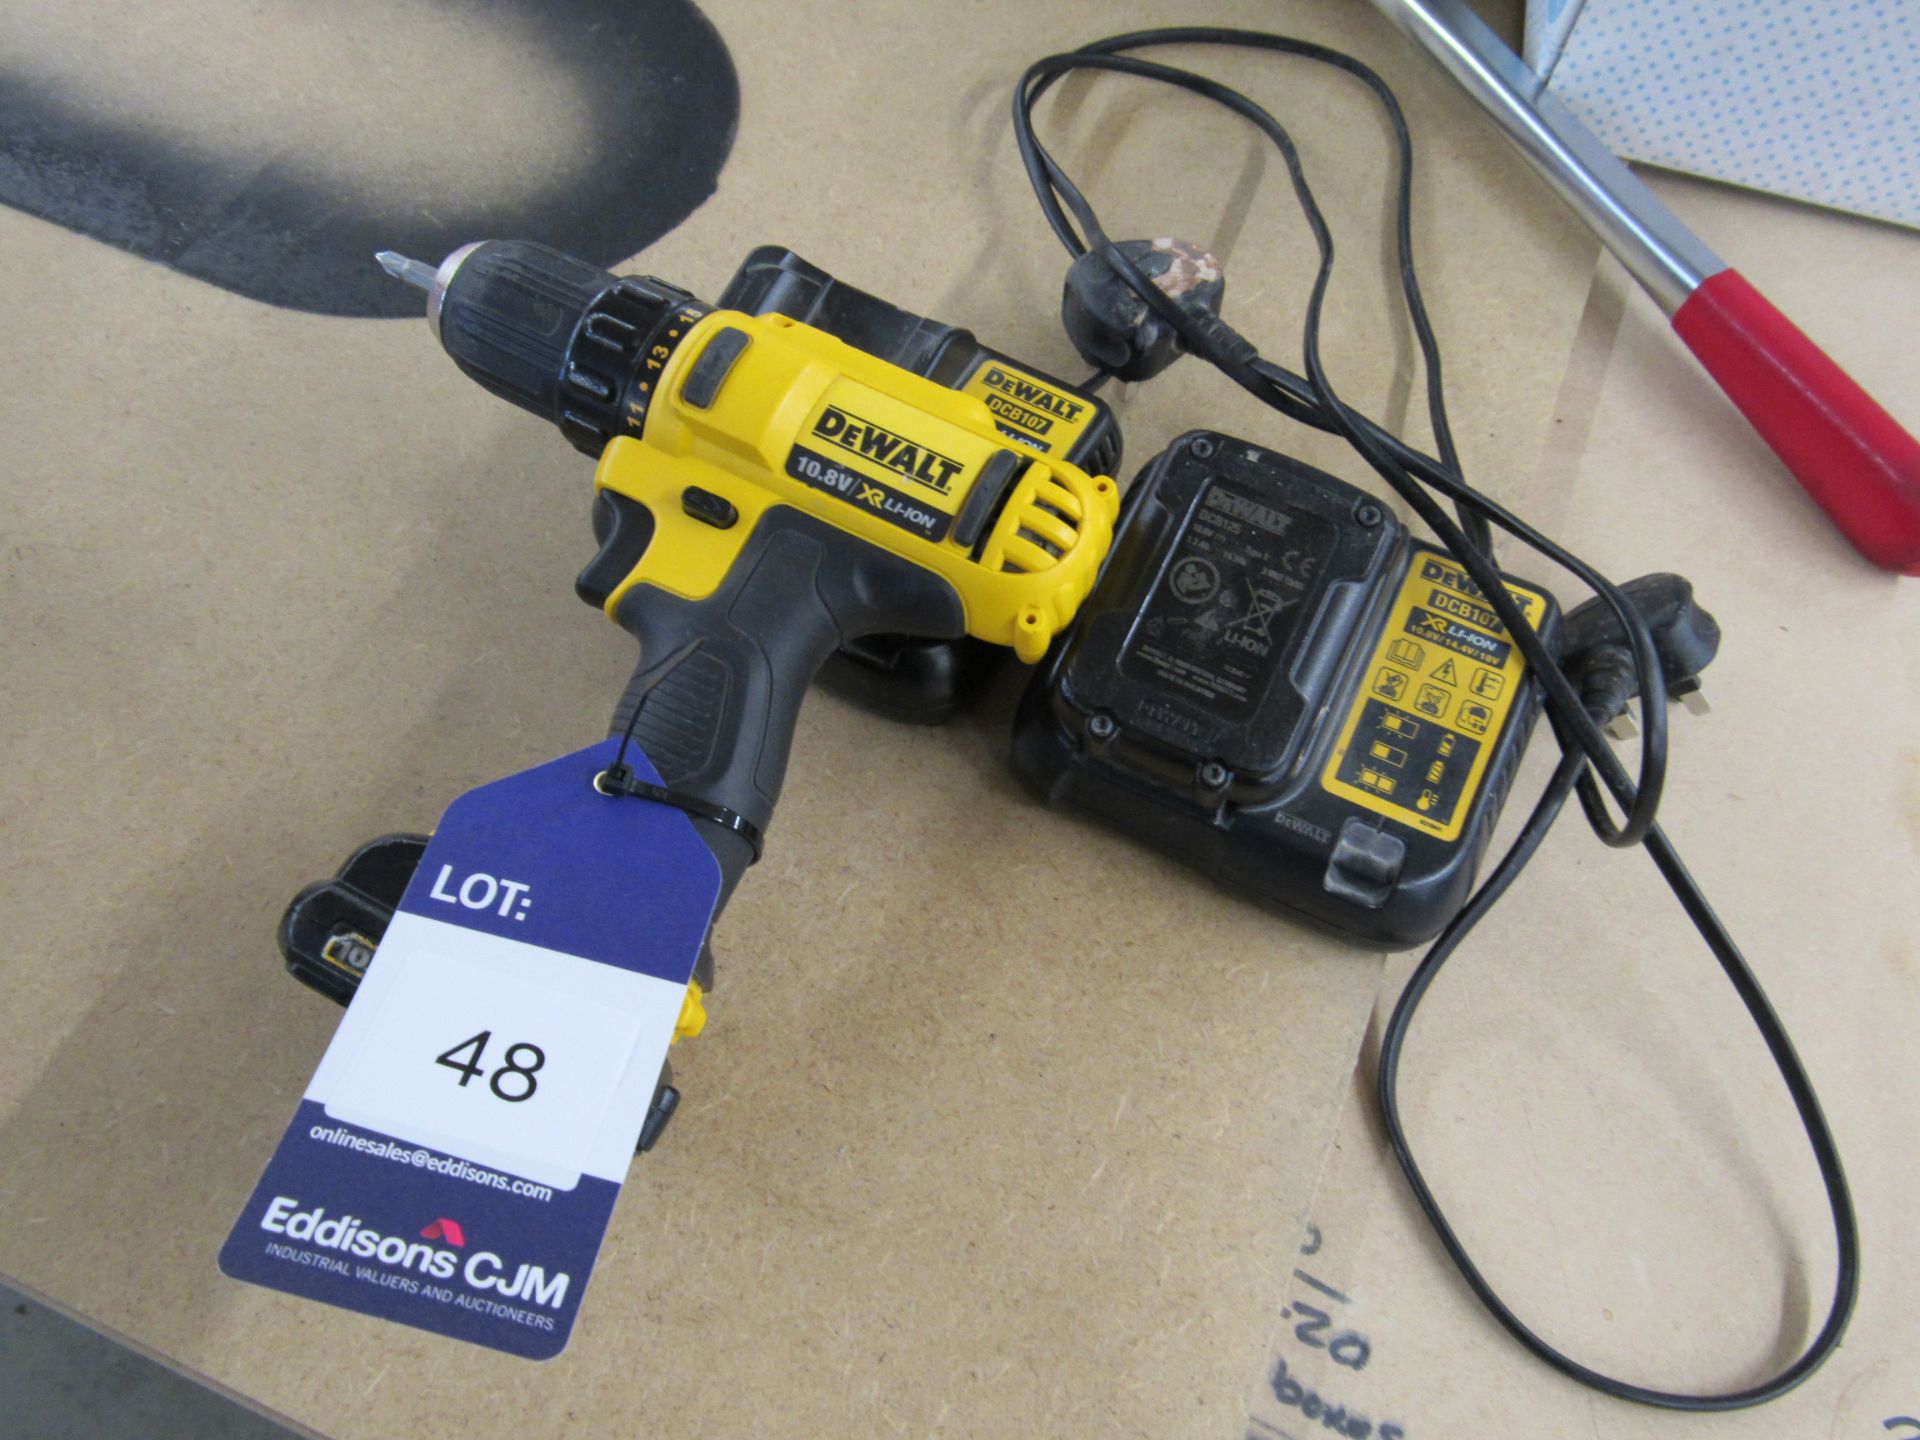 Dewalt DCD710 Cordless Driver with 2 Batteries and Charger - Image 2 of 2